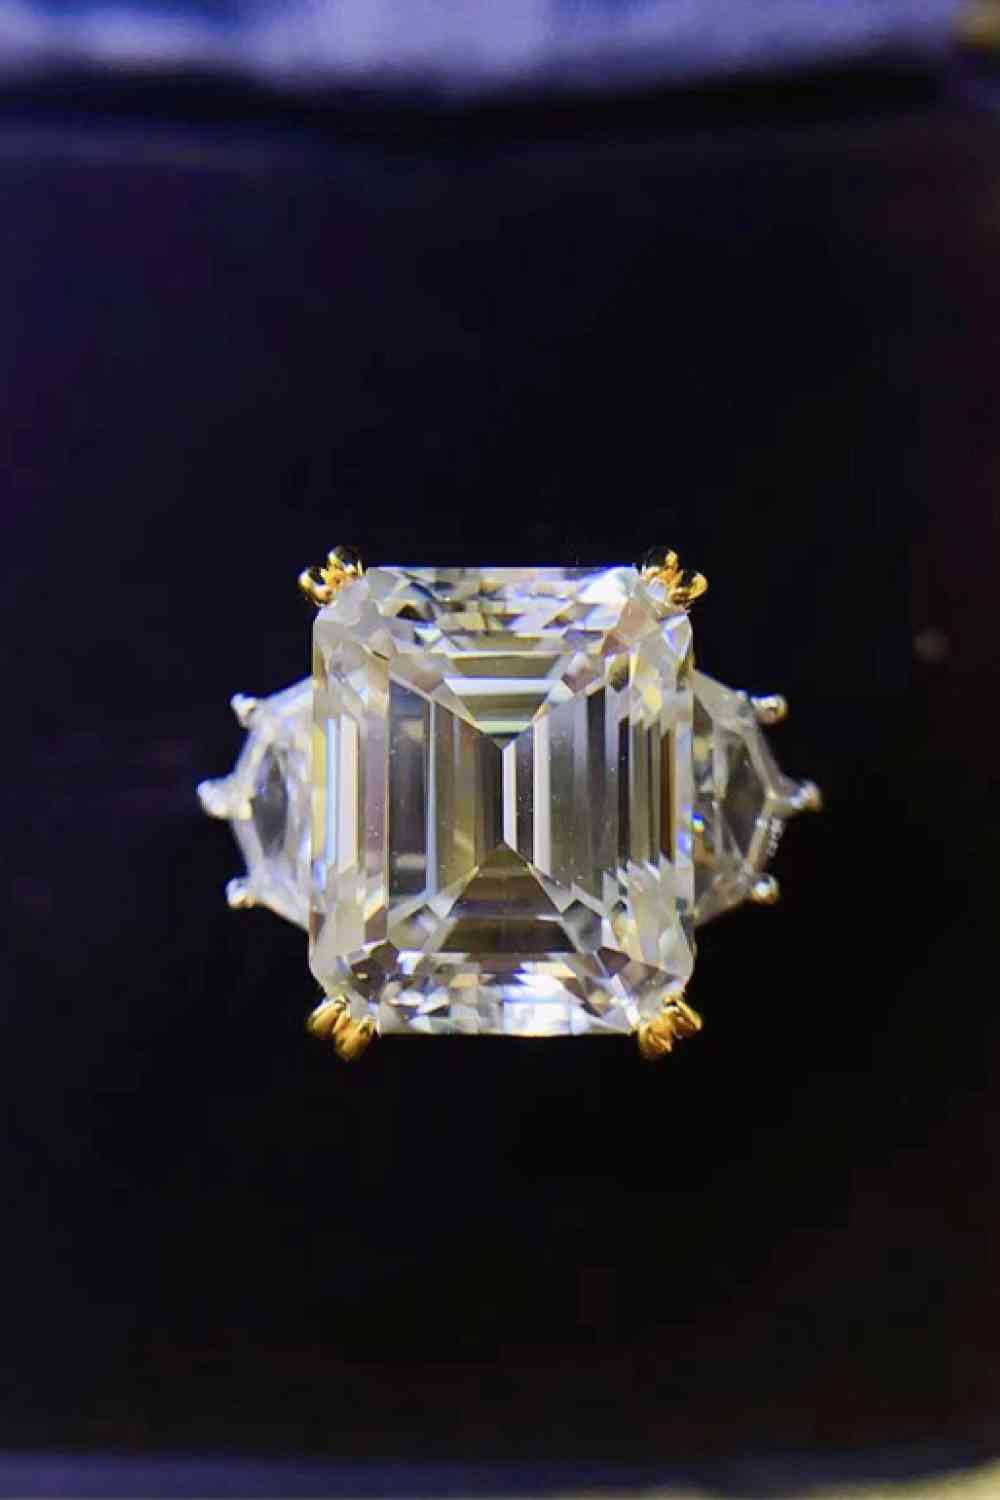 a fancy ring with an emerald cut diamond